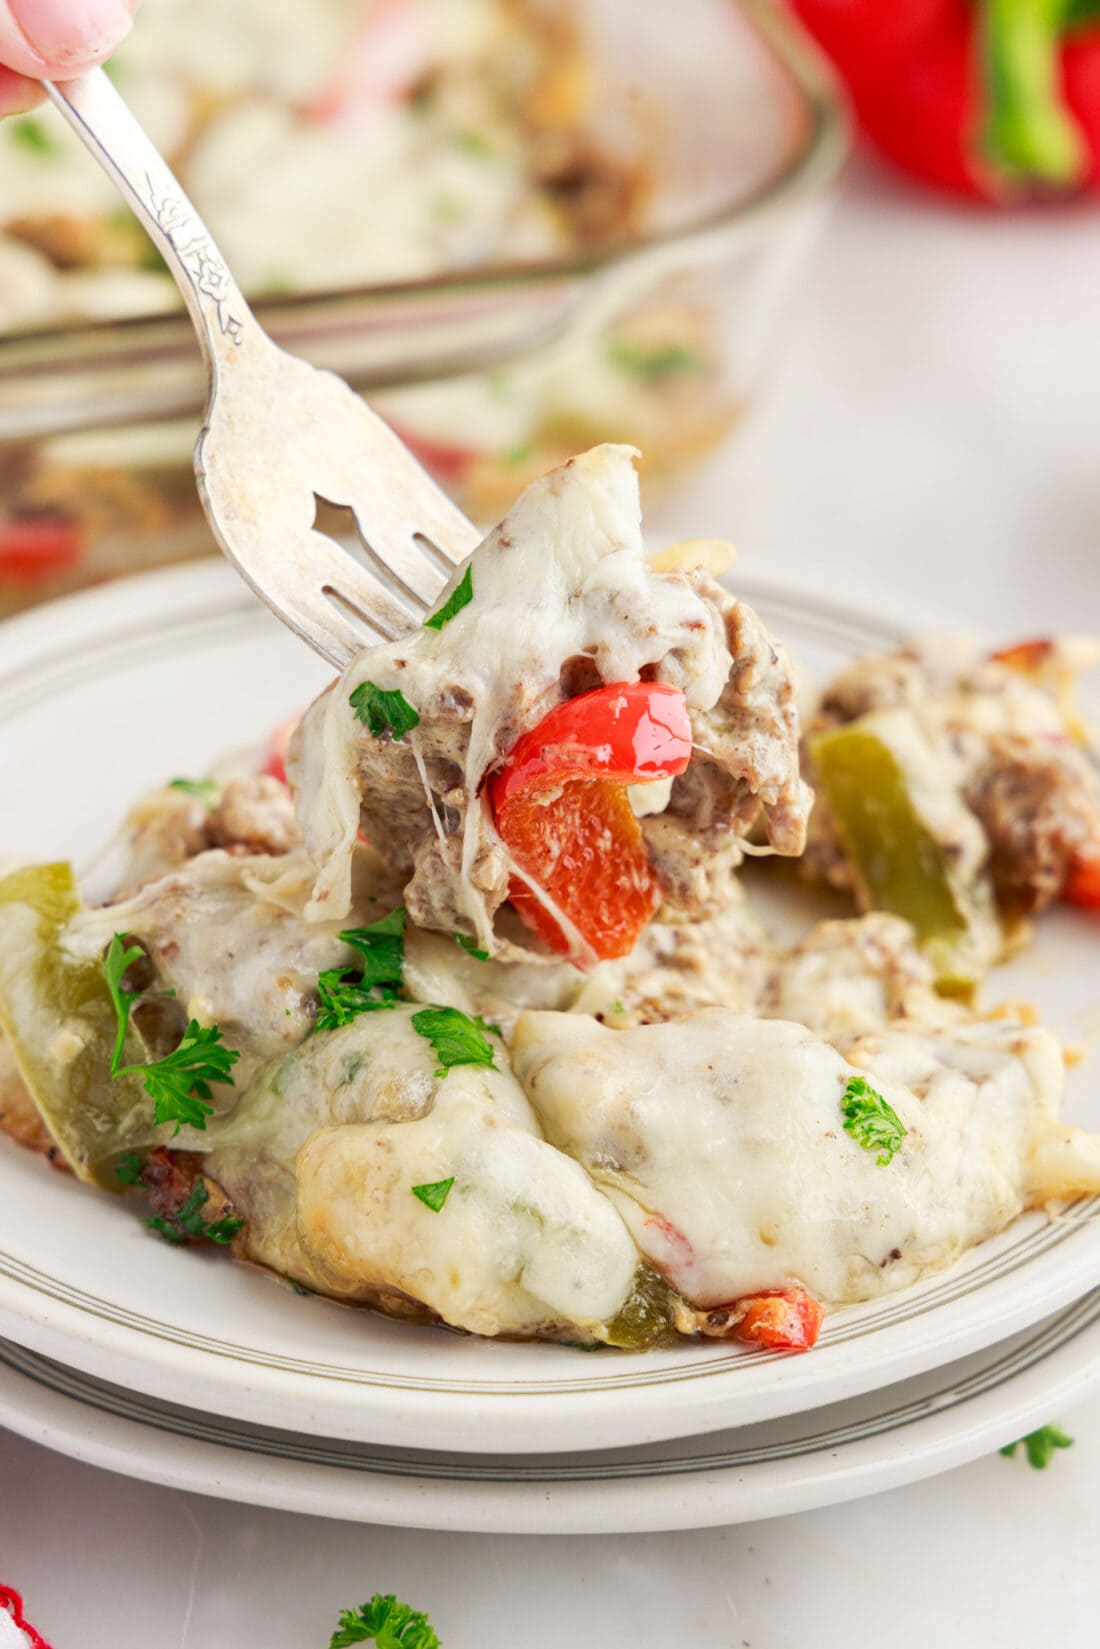 Forkful of Philly Cheesesteak Casserole being lifted off a plate of Philly Cheesesteak Casserole